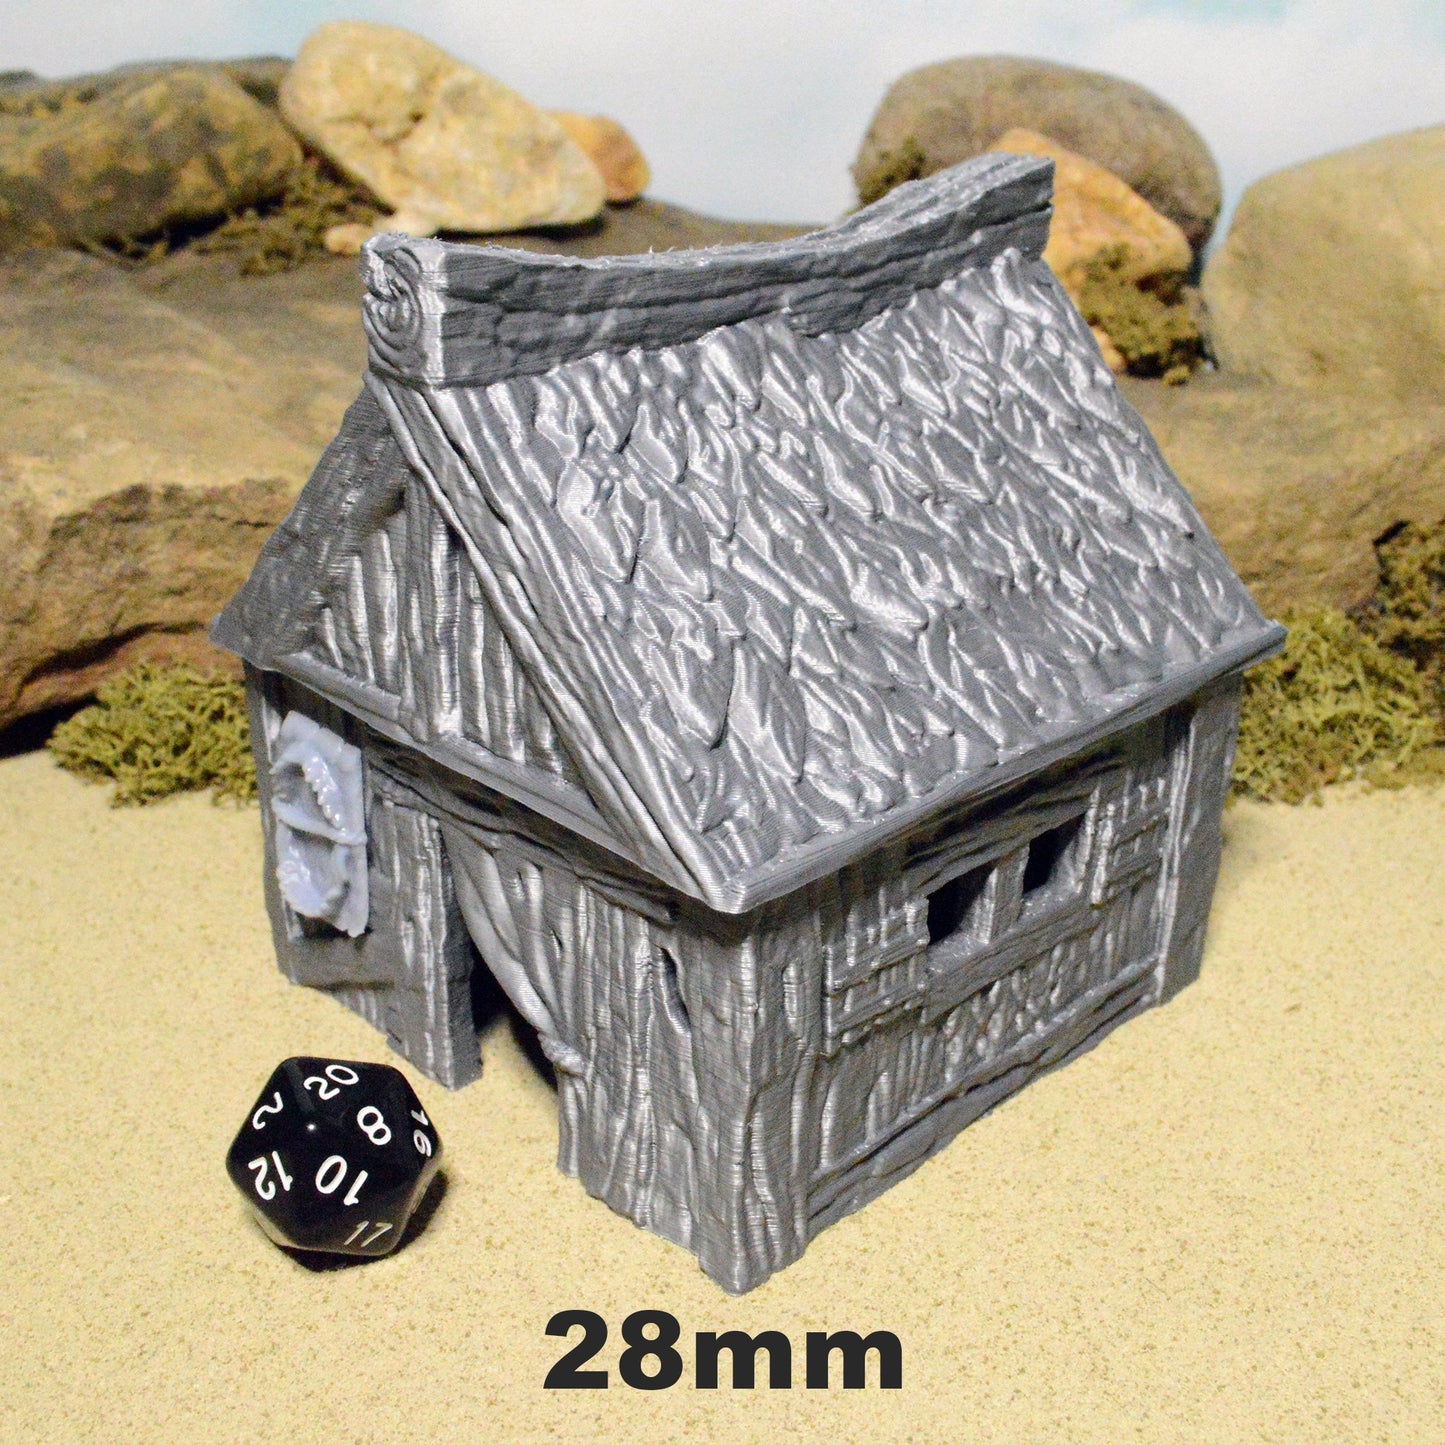 Fisherman's Hut 15mm 28mm 32mm for D&D Terrain, DnD Pathfinder Pirate Coastal House, Depths of Savage Atoll